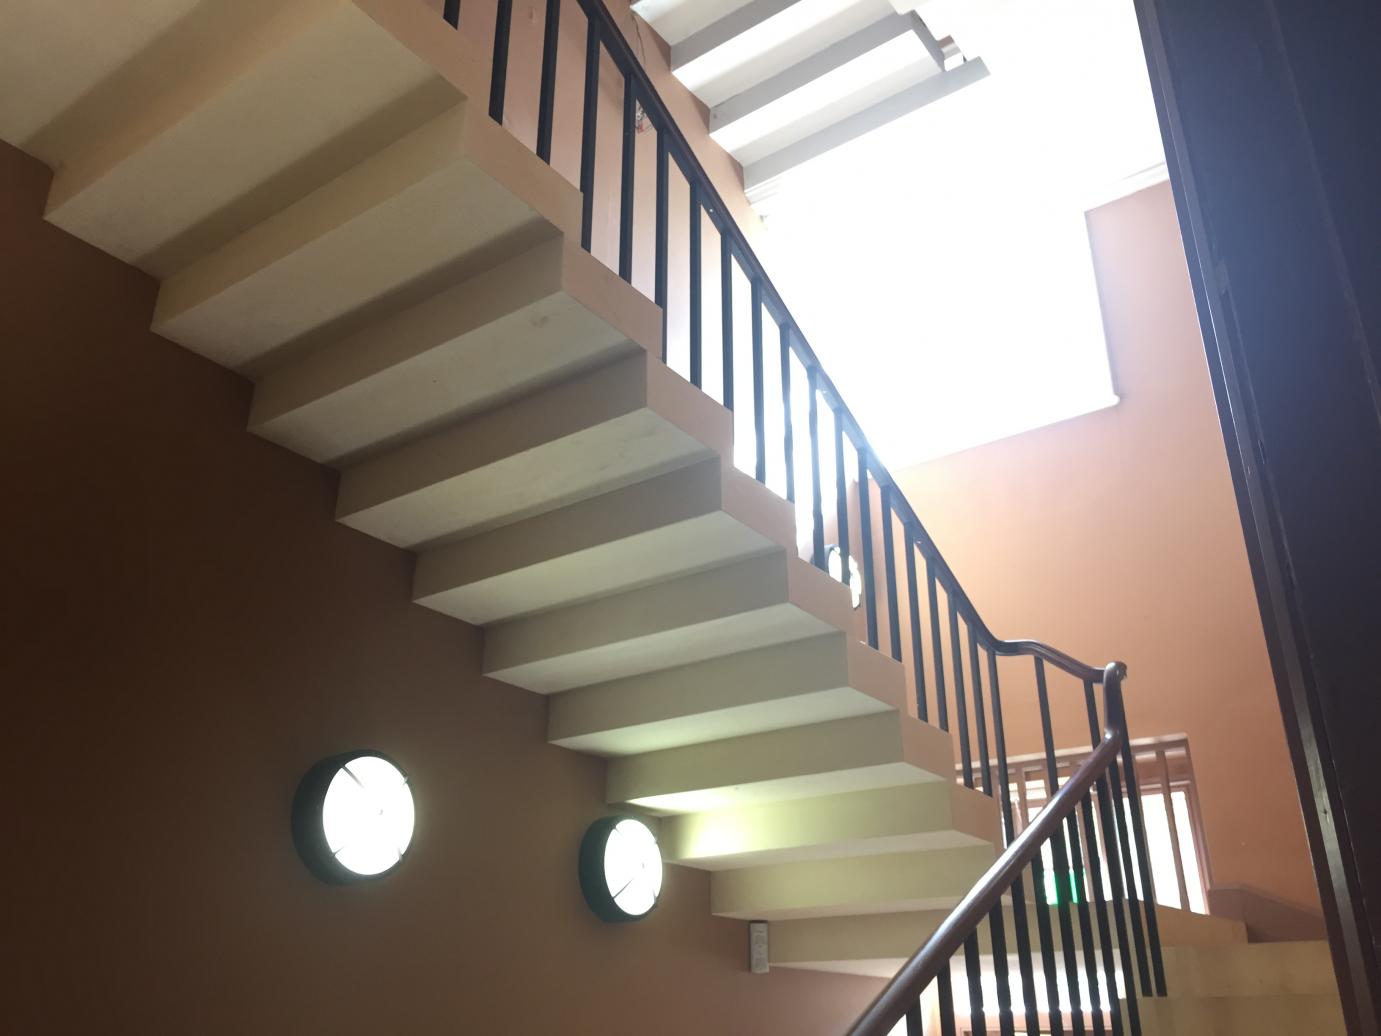 cantilevered stone staircase